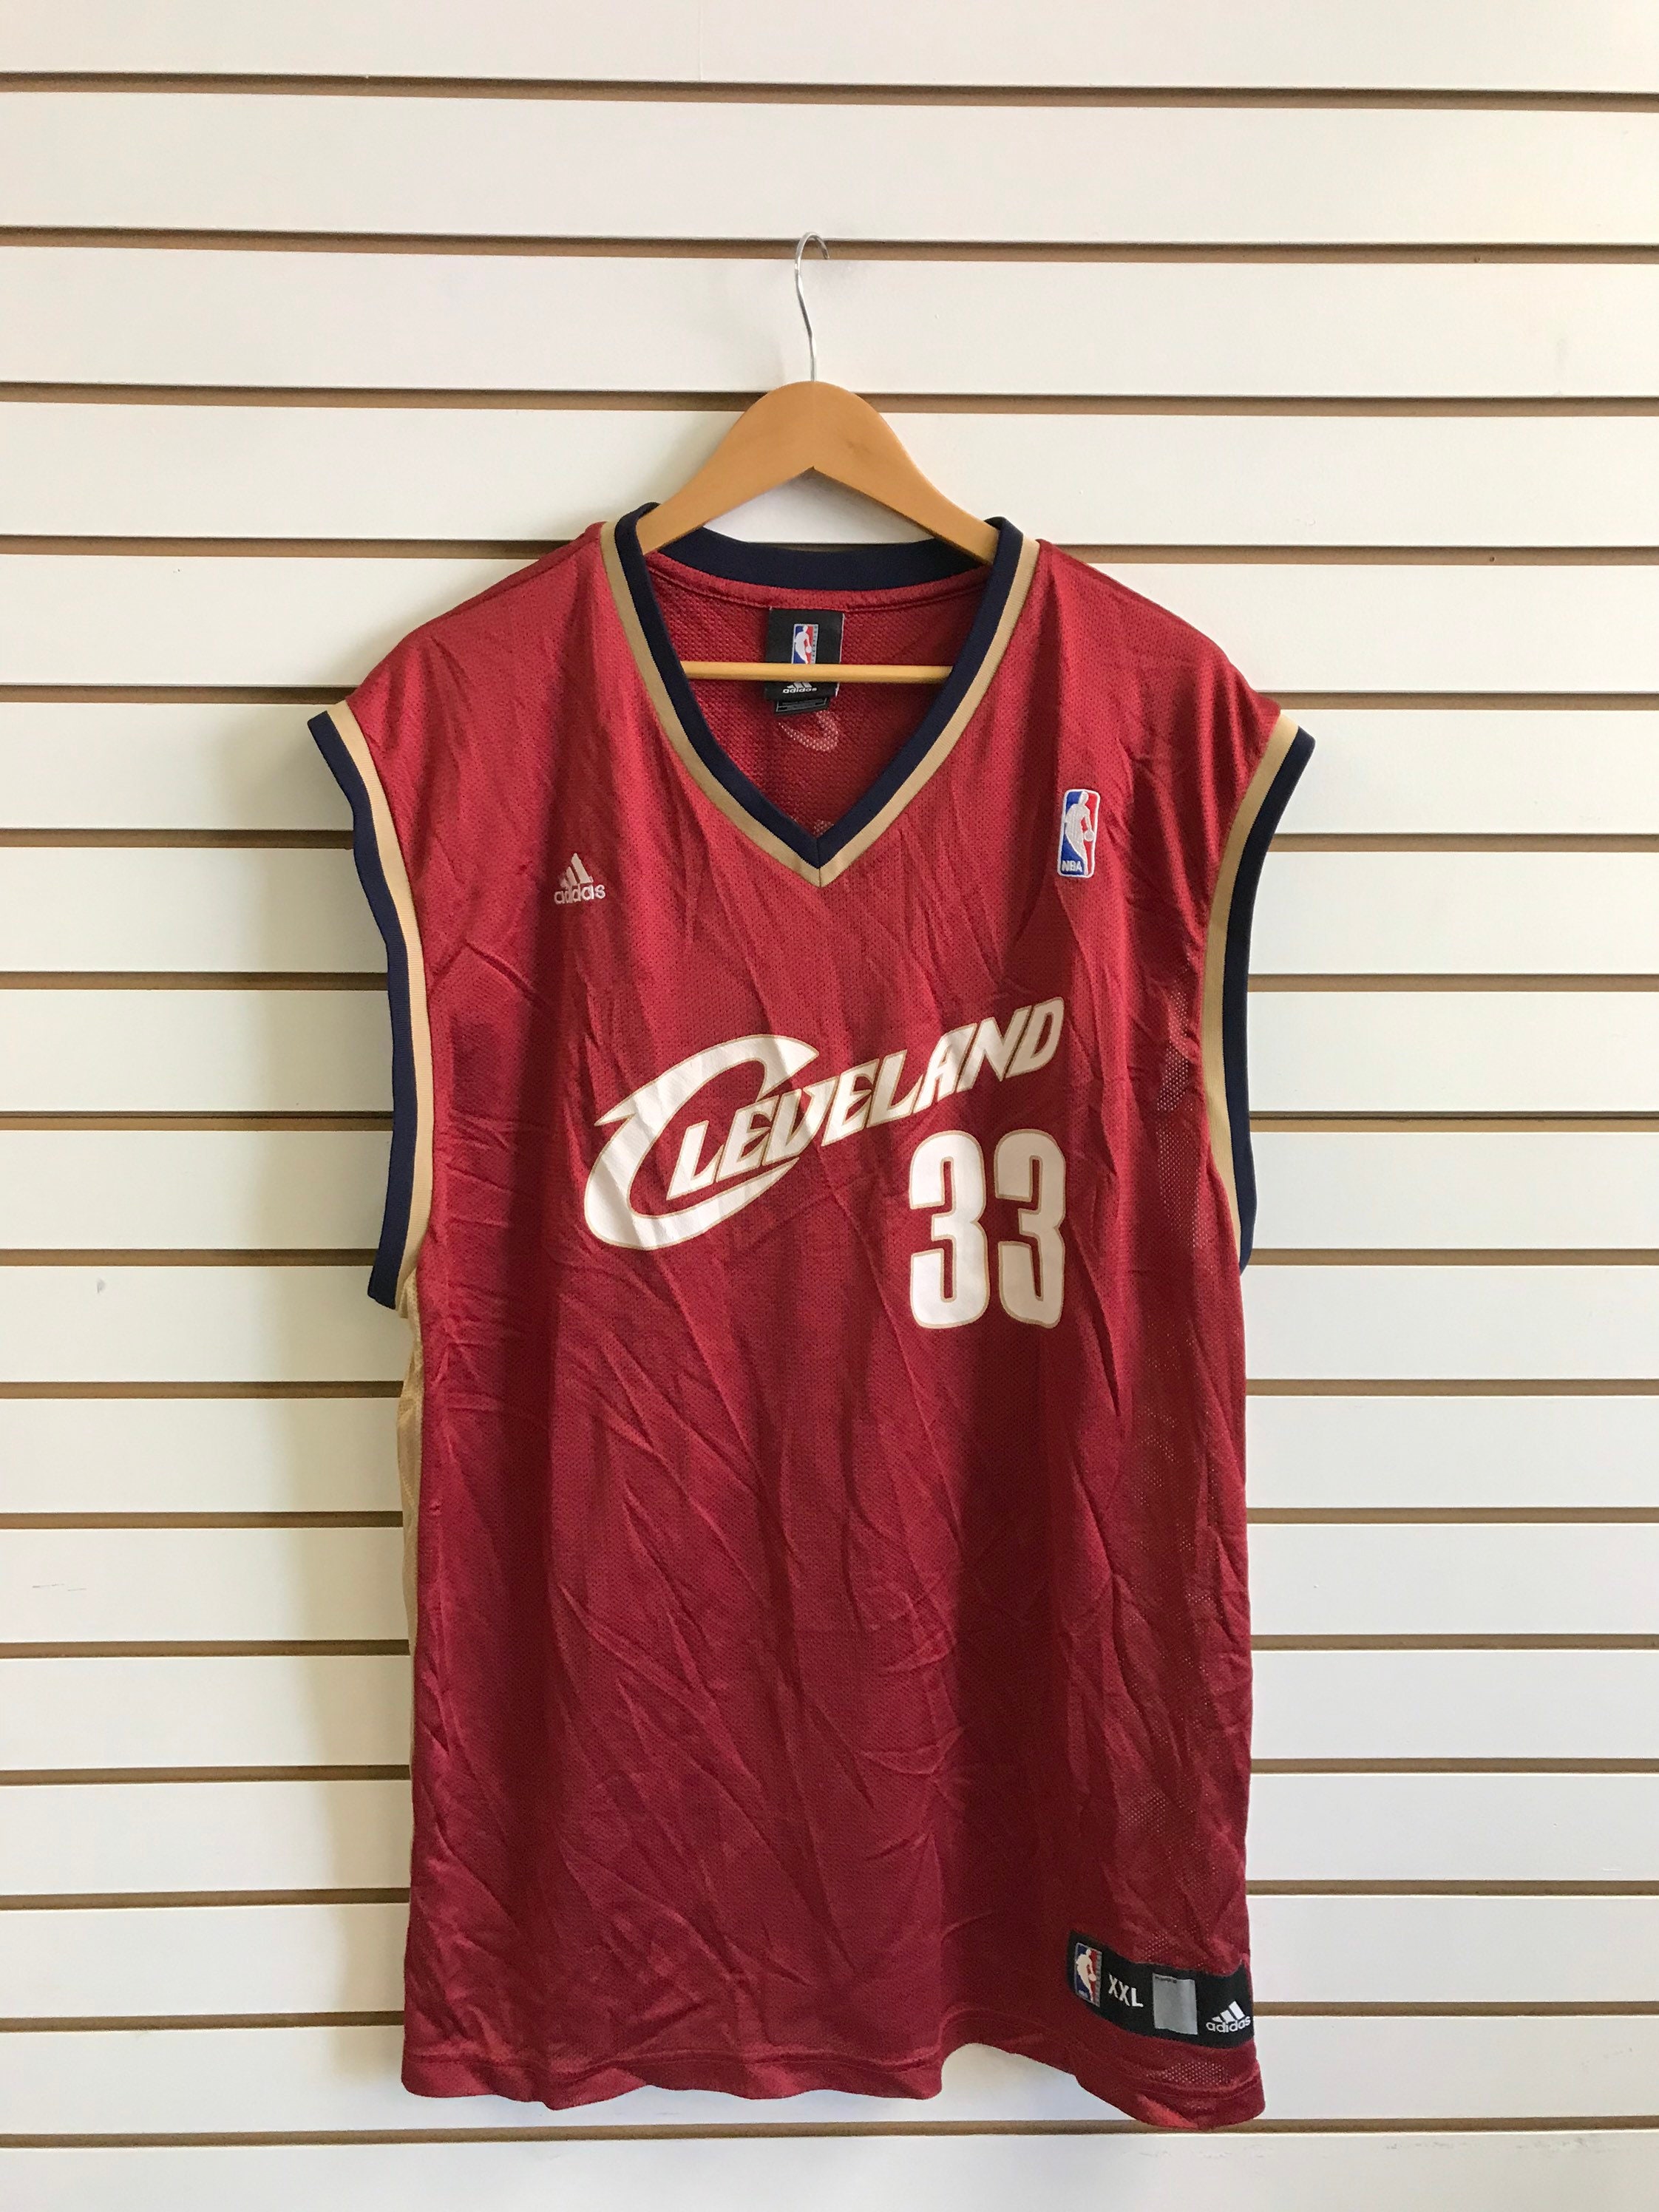 VTG Authentic Adidas Cleveland Cavaliers Shaquille O'Neal Jersey